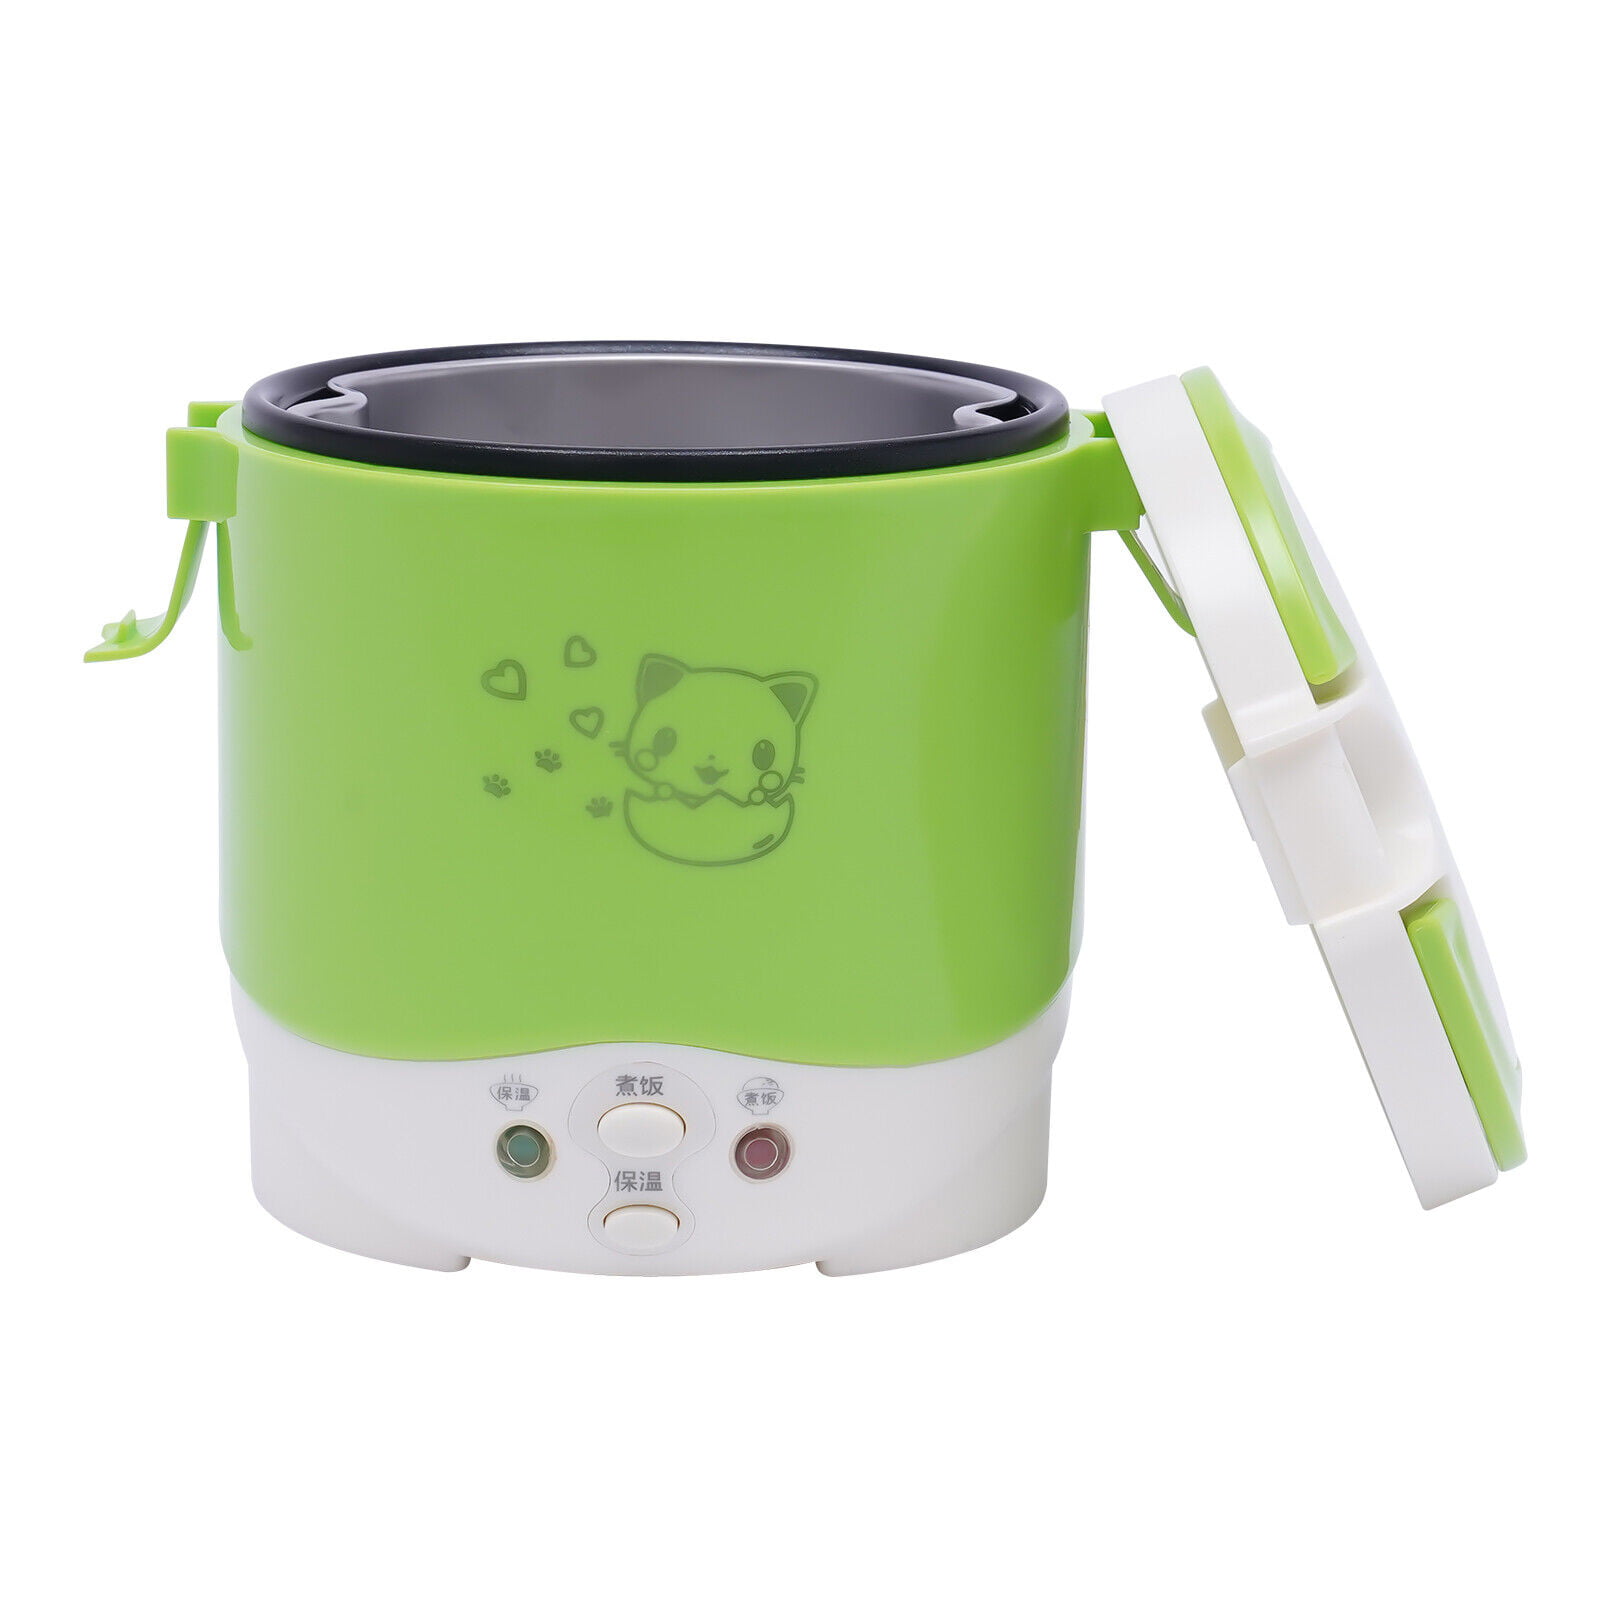 Shikiy 12V Mini Rice Cooker 1 Cup Rice Cooker, Portable Soup Cooker  Insulatable Small Rice Cooker for Home, Traveling (White)